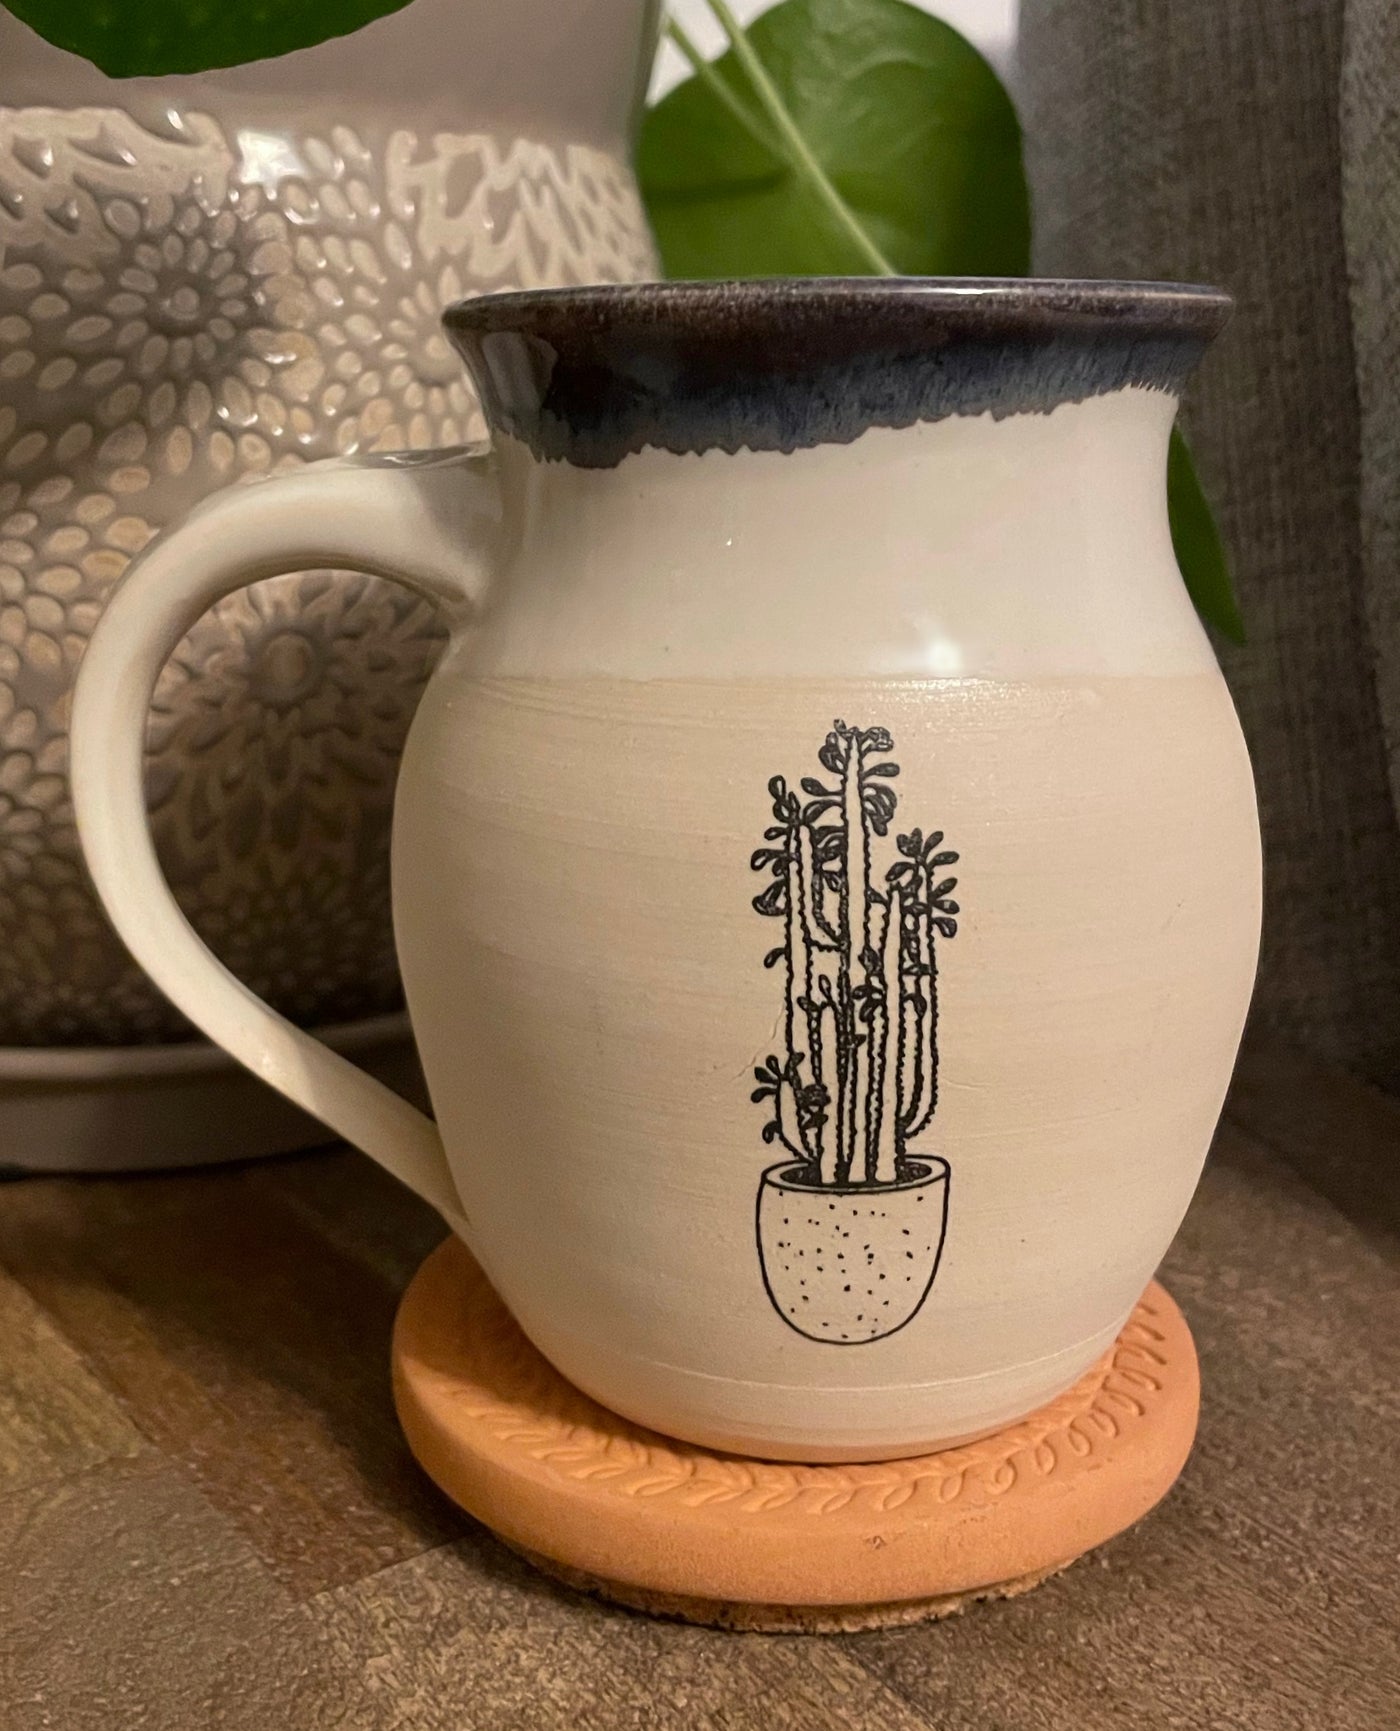 B4 These small batch, handmade mugs are available in blue or green. Each mug is stamped with a unique plant design. Explore the best and coolest gift ideas for plant enthusiasts!